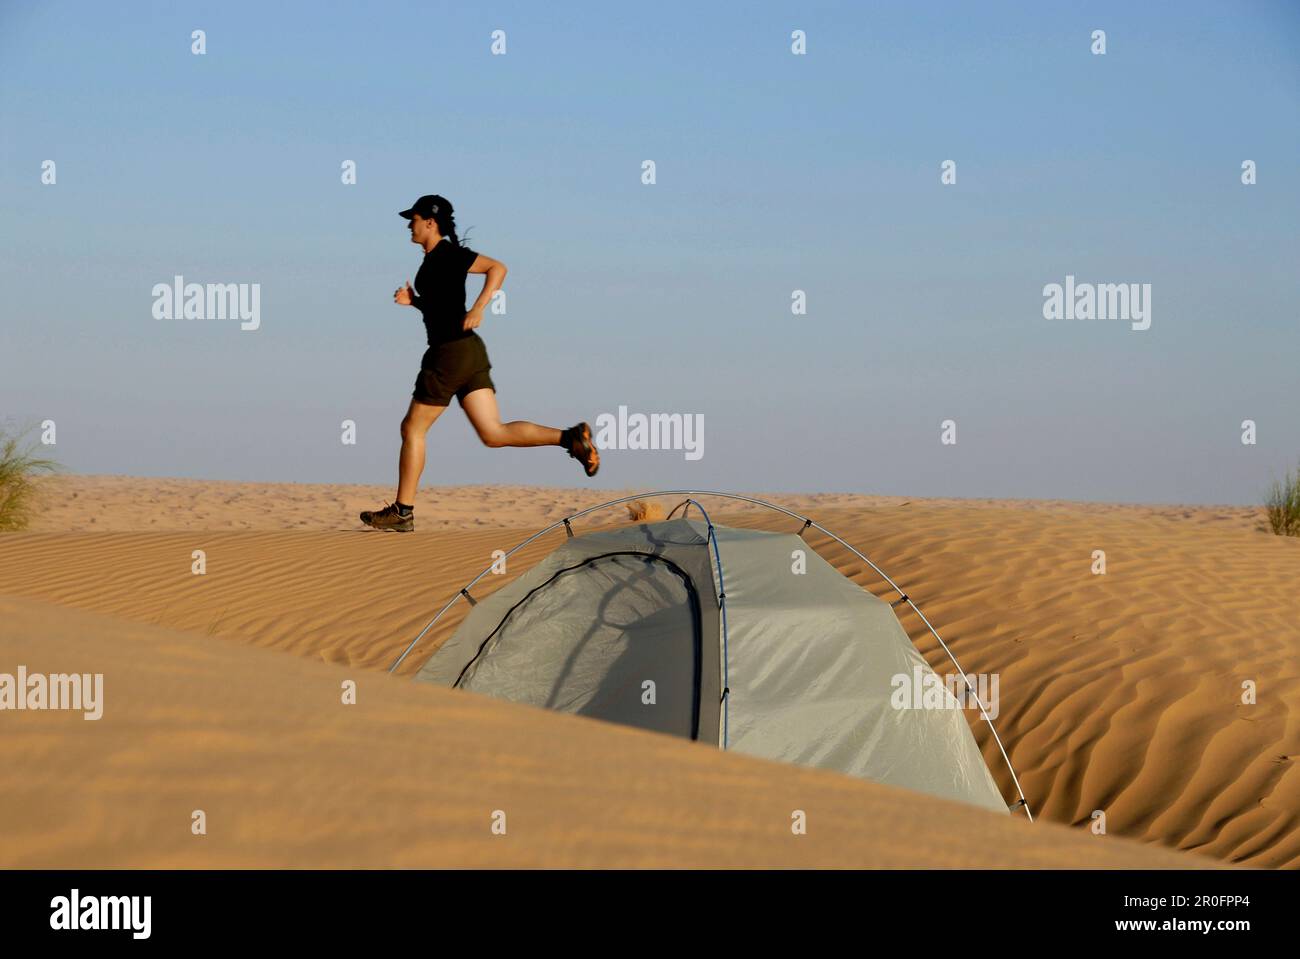 Woman jogging over dune, tent in foreground, Djebel Tembaine, Tunisia Stock Photo